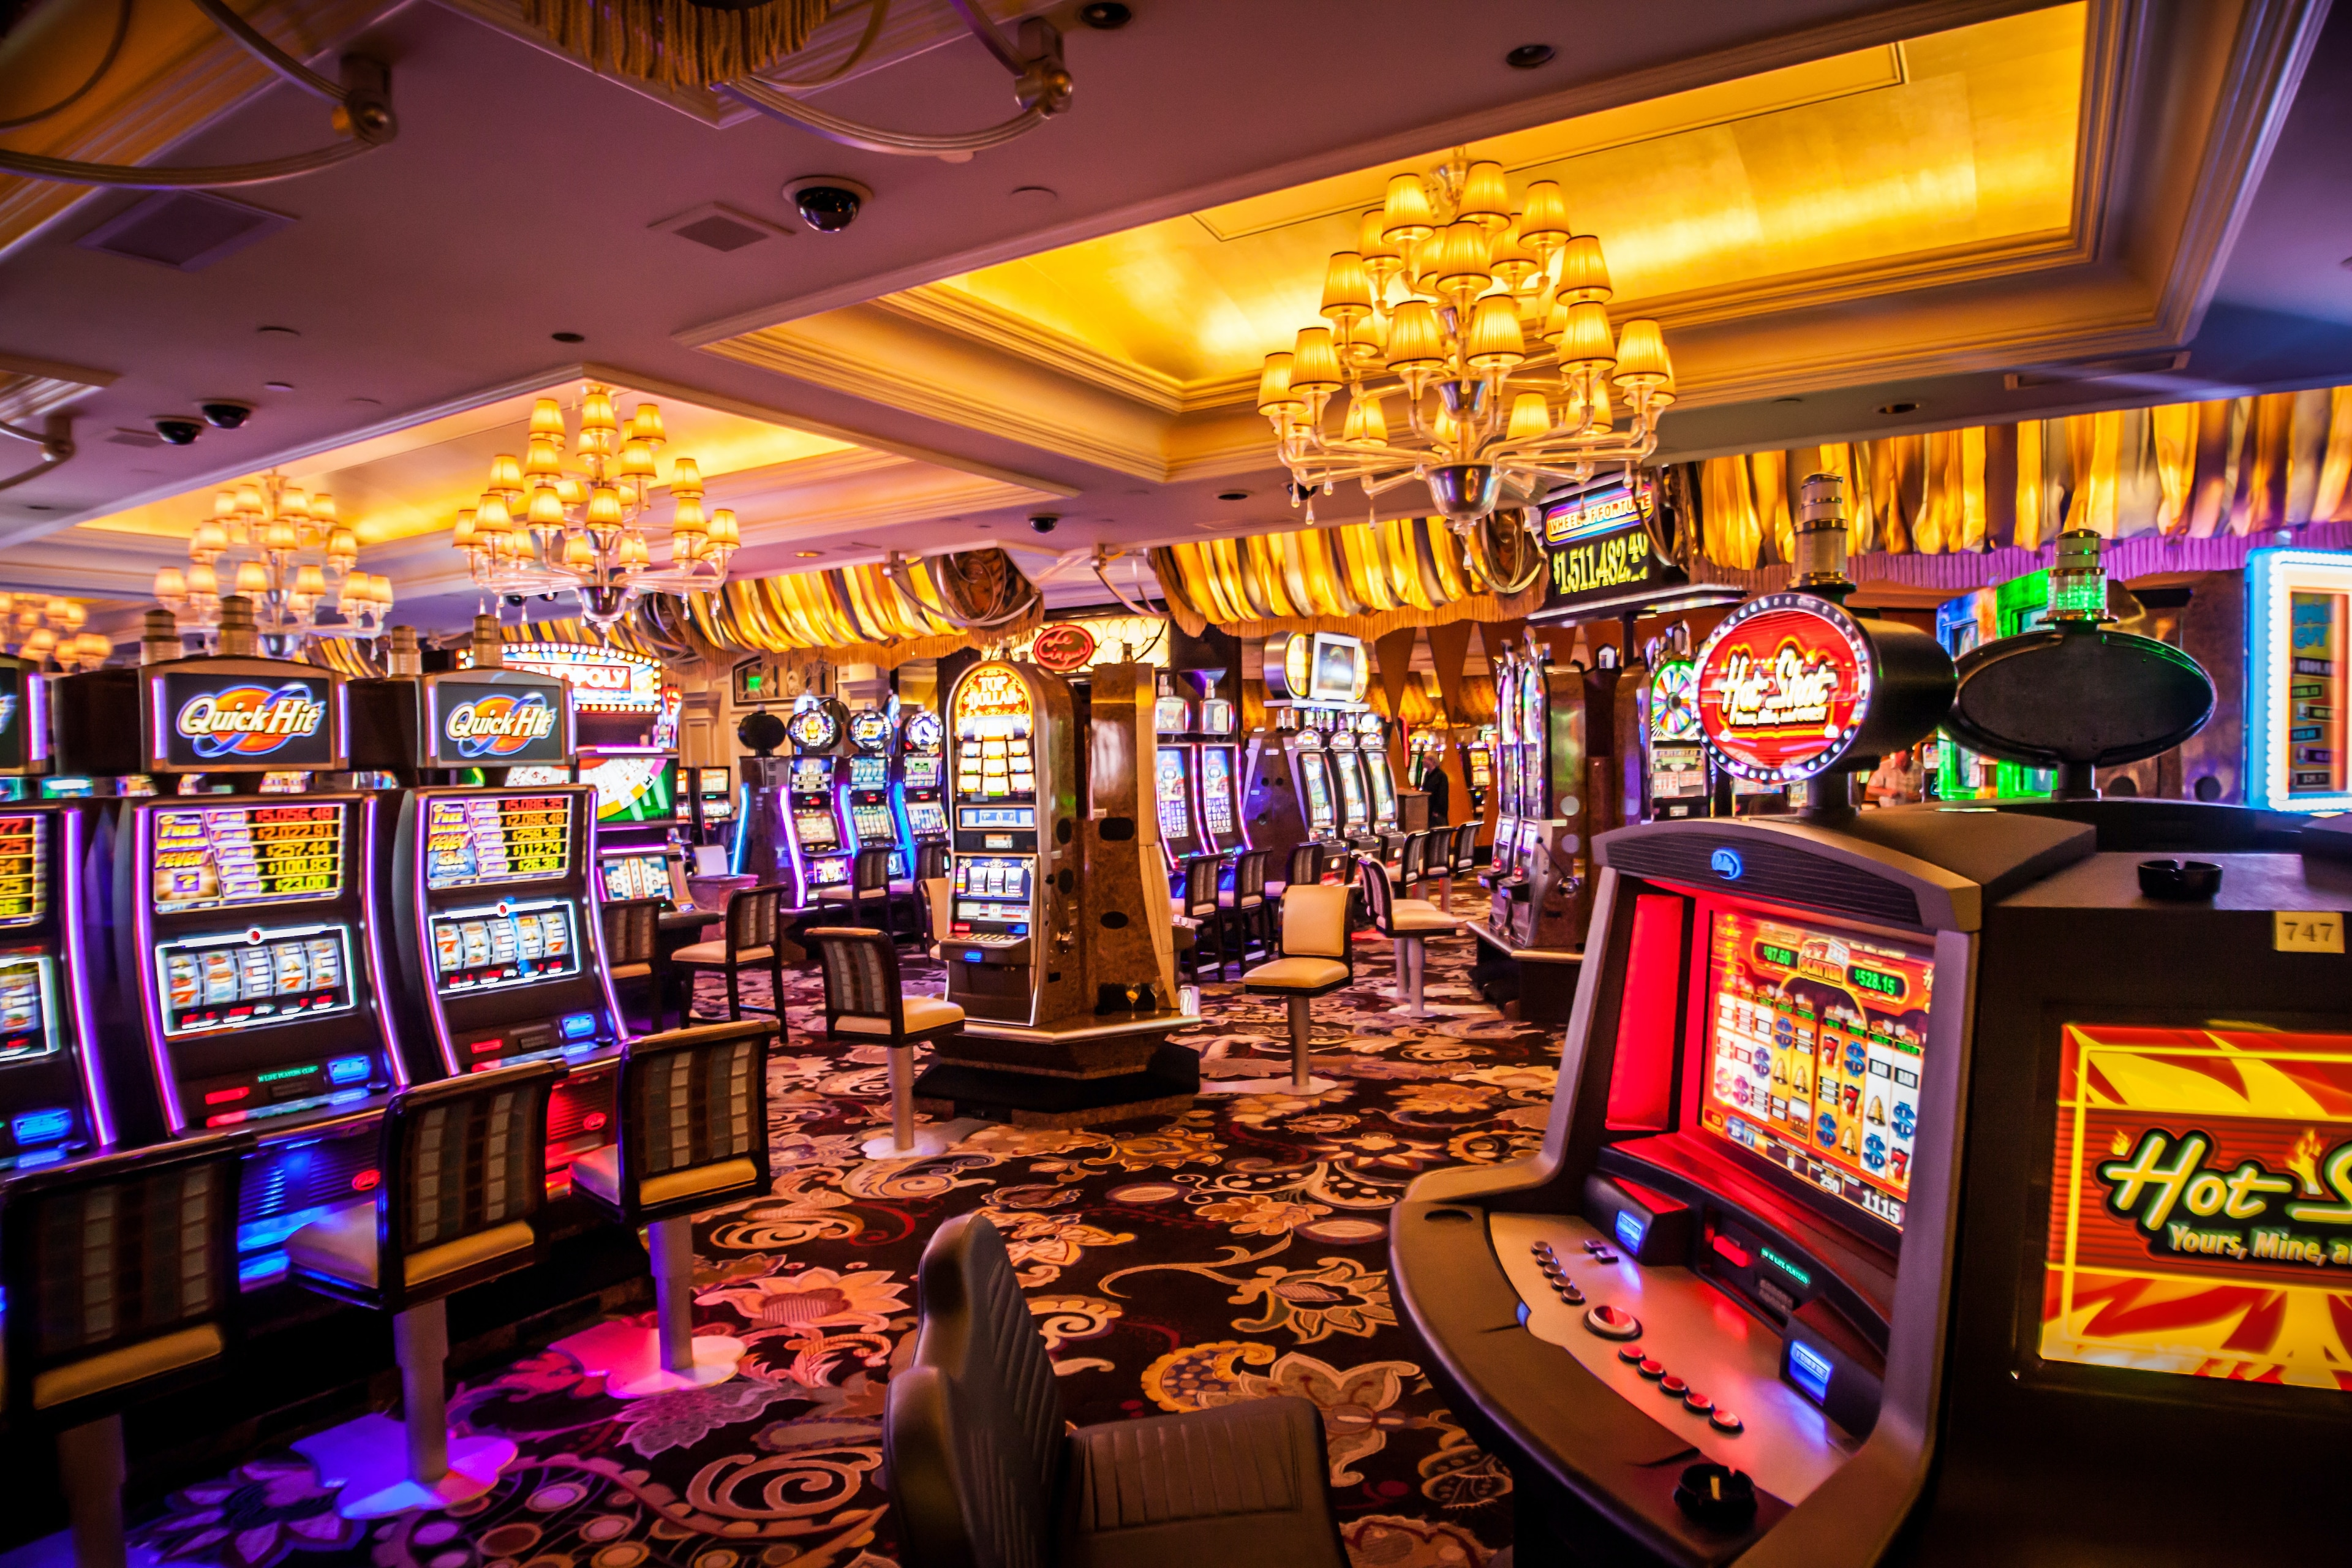 Top 9 Tips With casinos